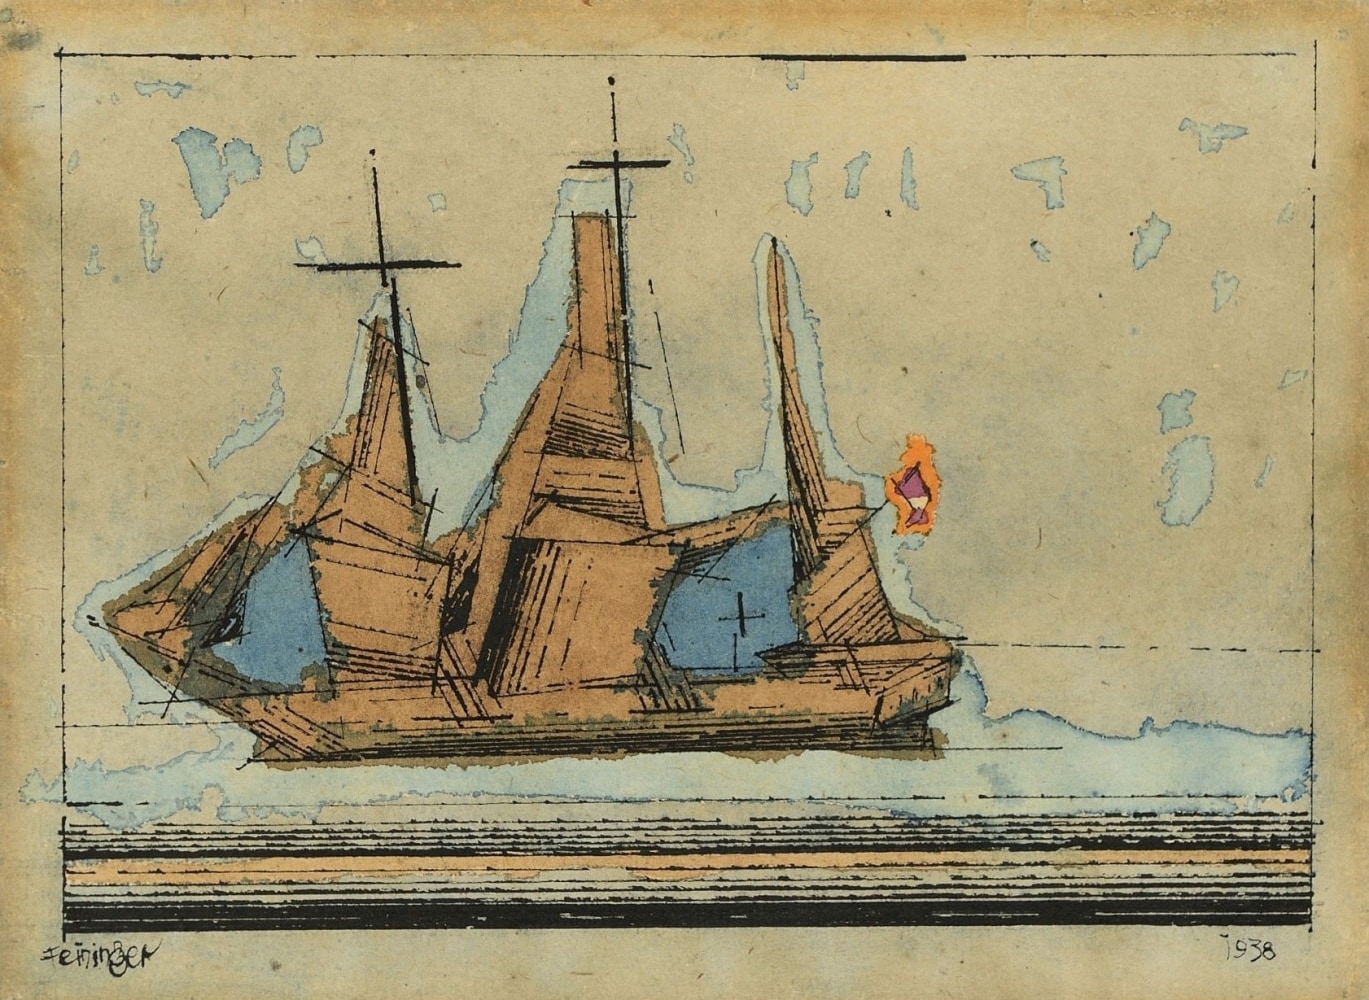 Lyonel&amp;nbsp;Feininger (1871&amp;mdash;1956)

(Barque Against Blue Sky), 1938

Watercolor and ink on paper

6 7/8 x 9 in. (17.4 x 23 cm)

Signed lower left:&amp;nbsp;Feininger

Dated lower right:&amp;nbsp;1938